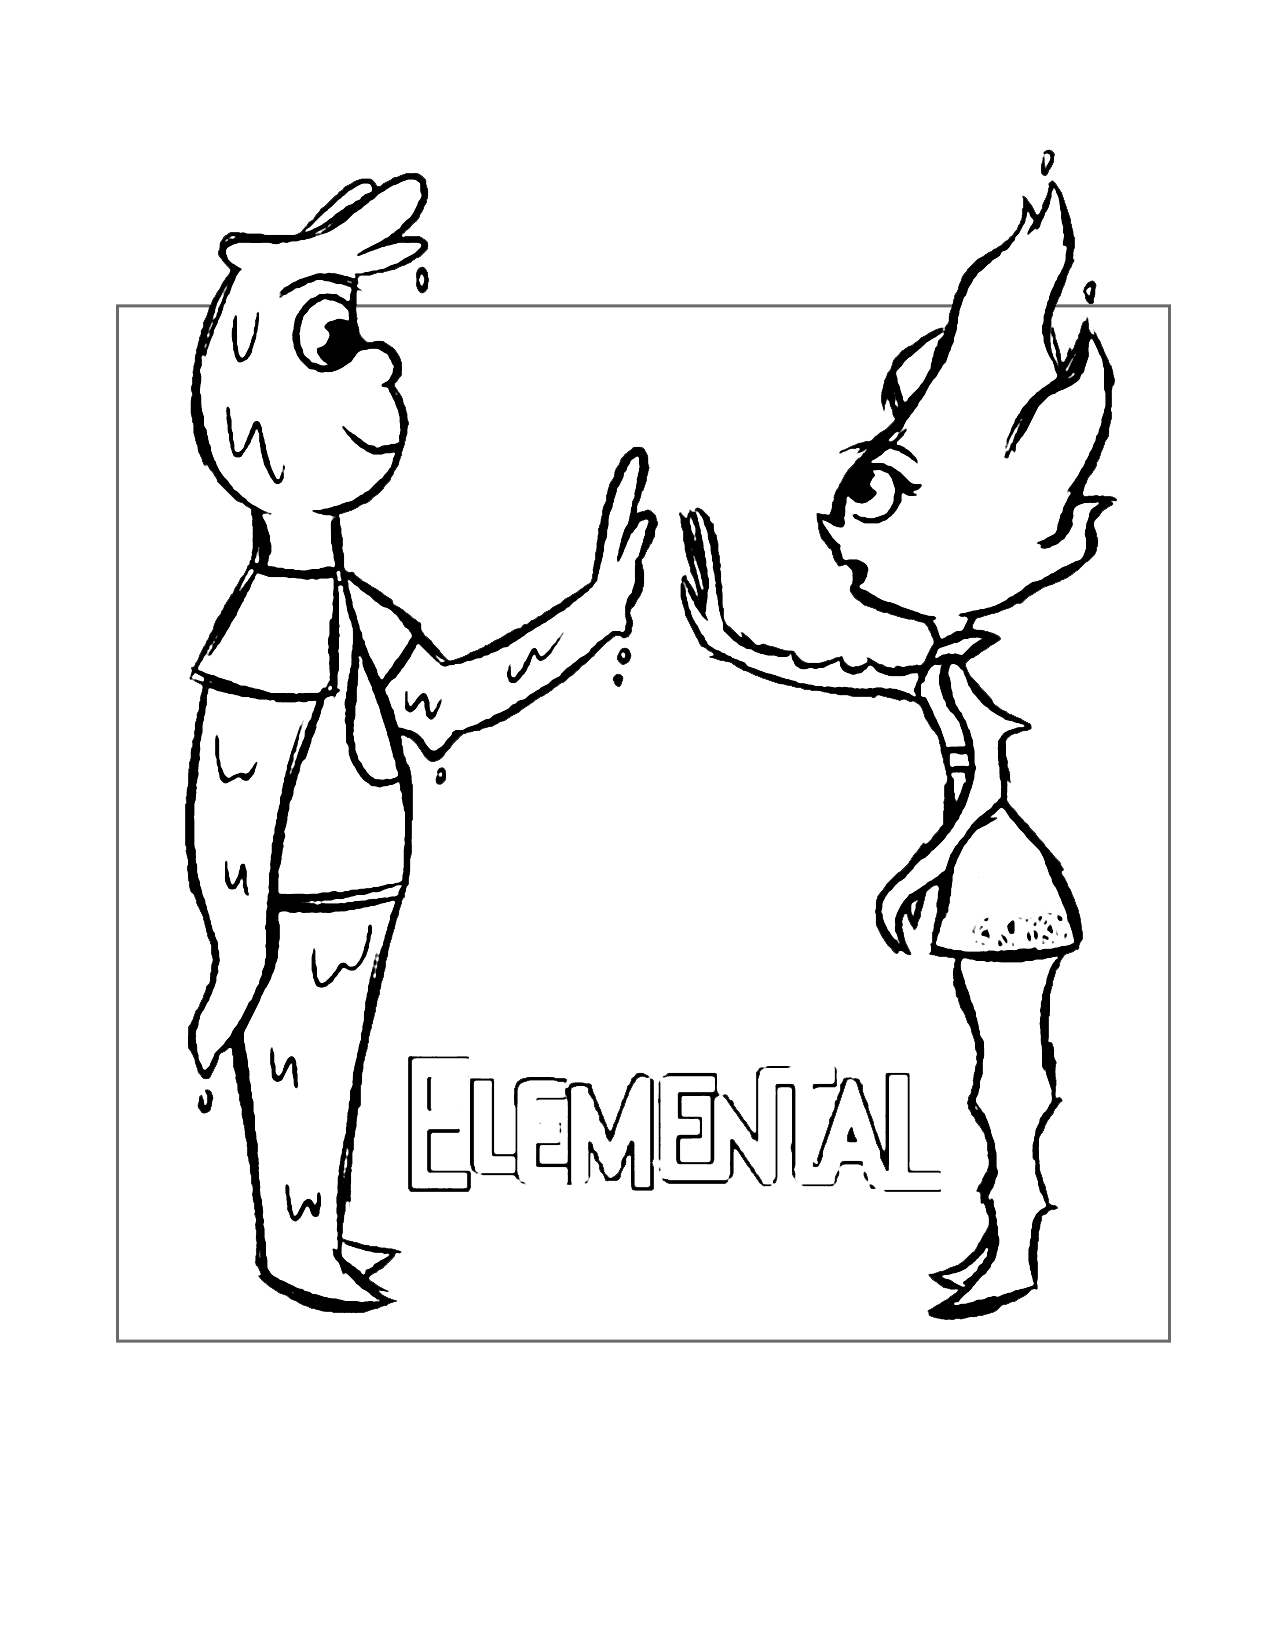 Elemental Coloring Pages